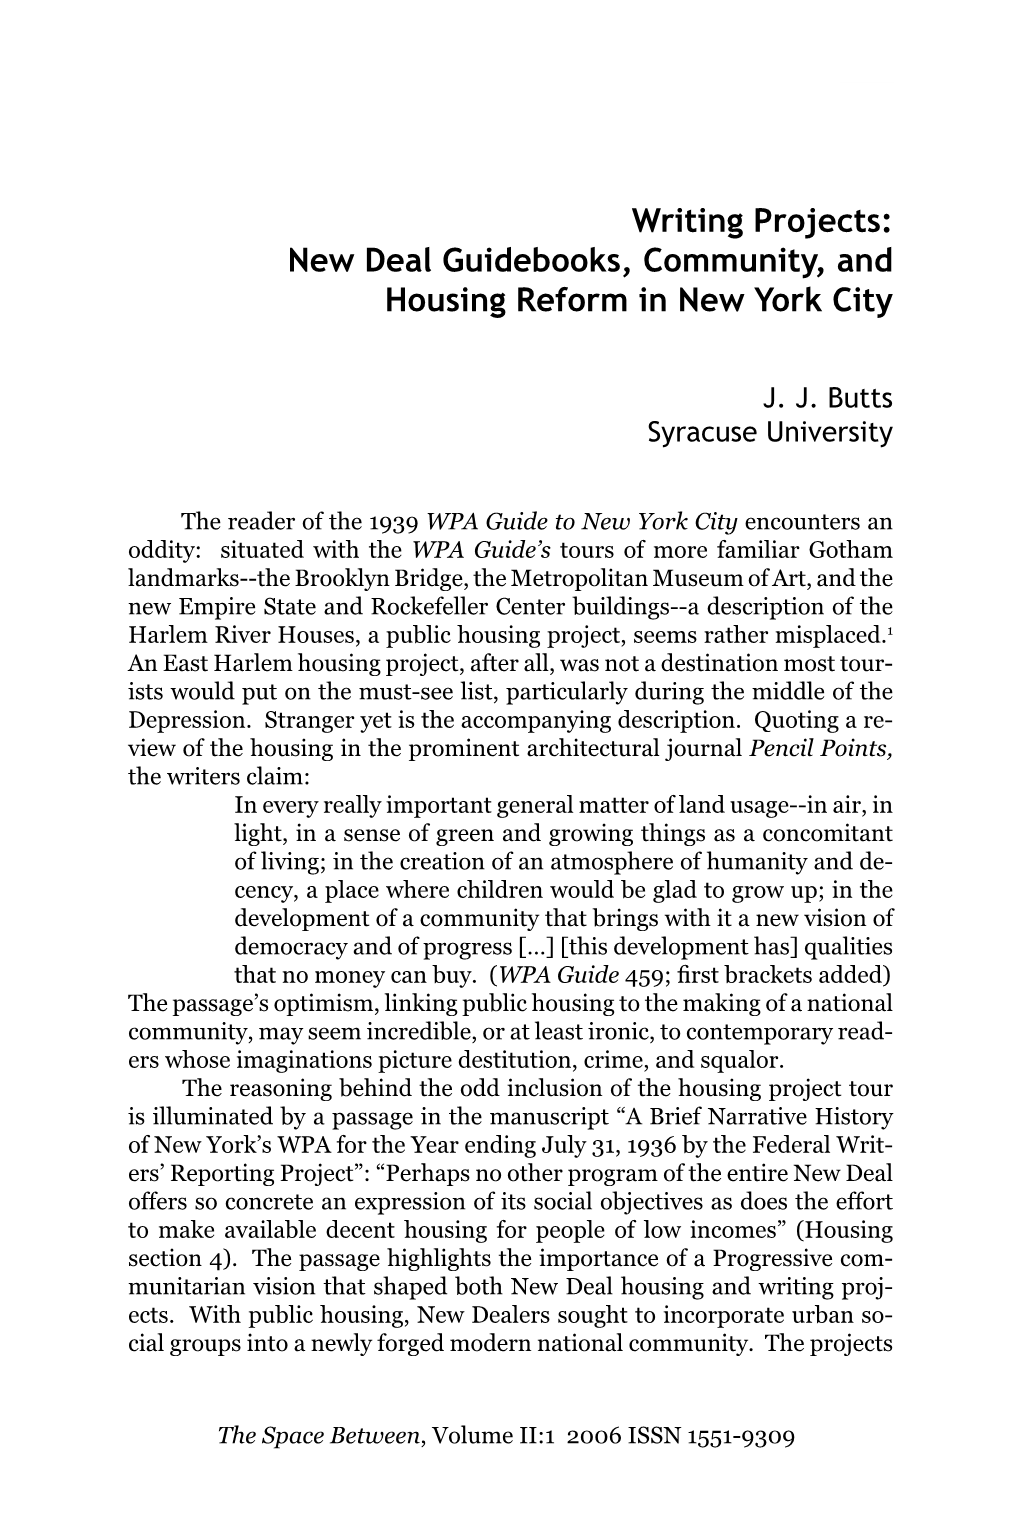 Writing Projects: New Deal Guidebooks, Community, and Housing Reform in New York City